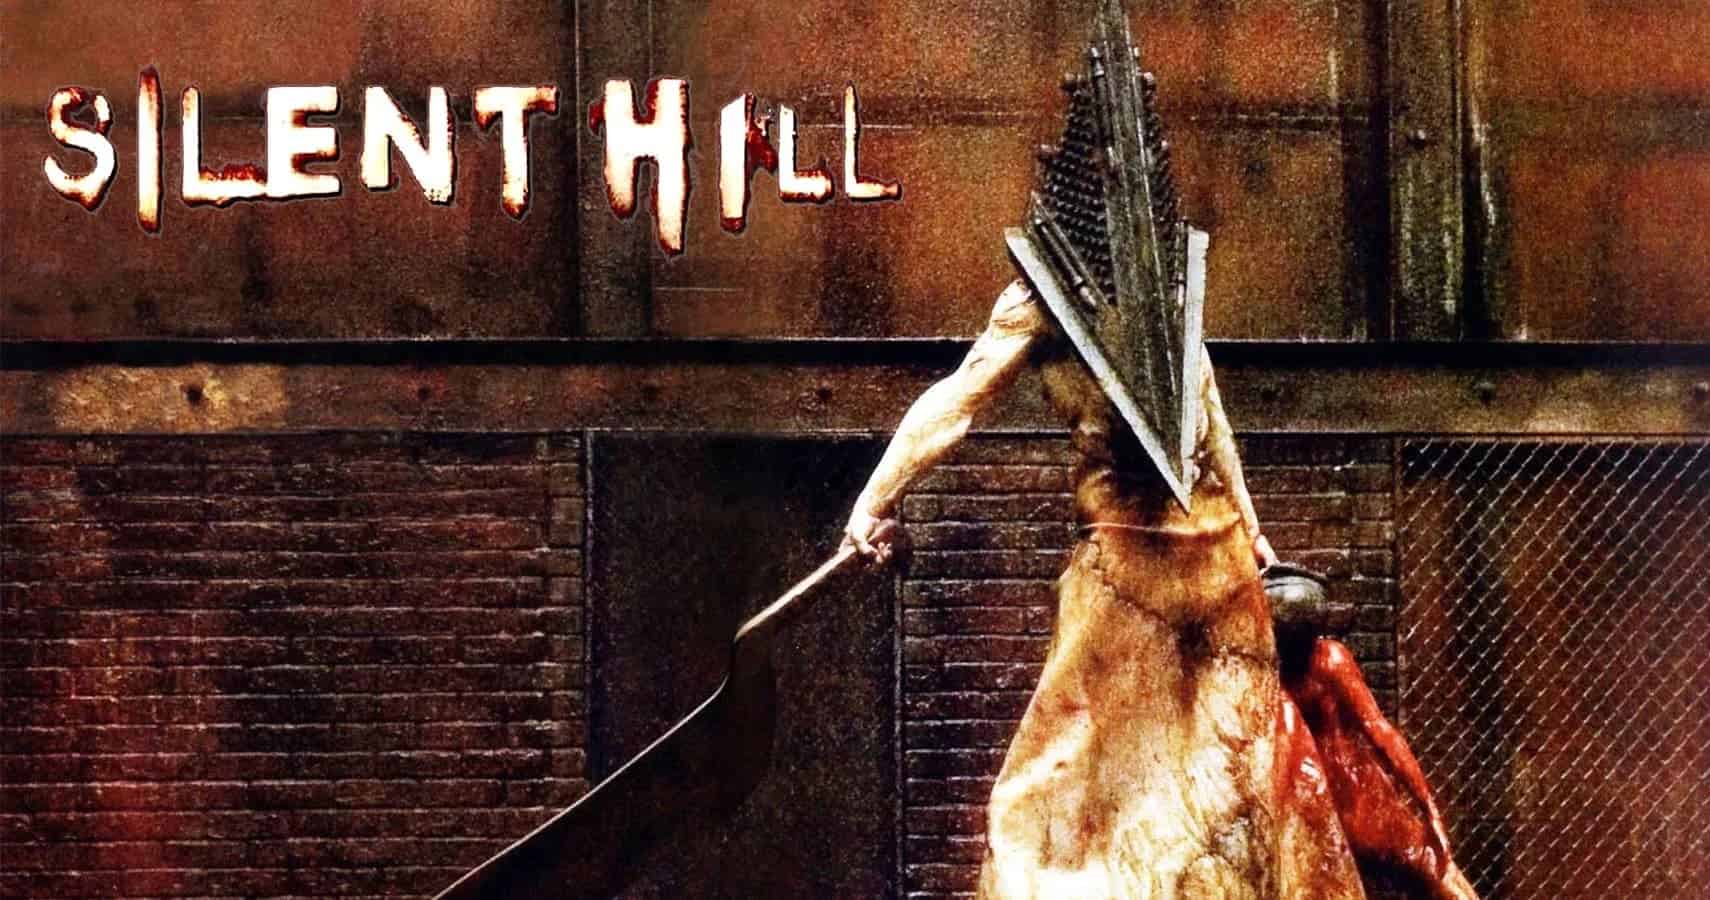 Silent Hill Announcement Coming Soon According to Composer